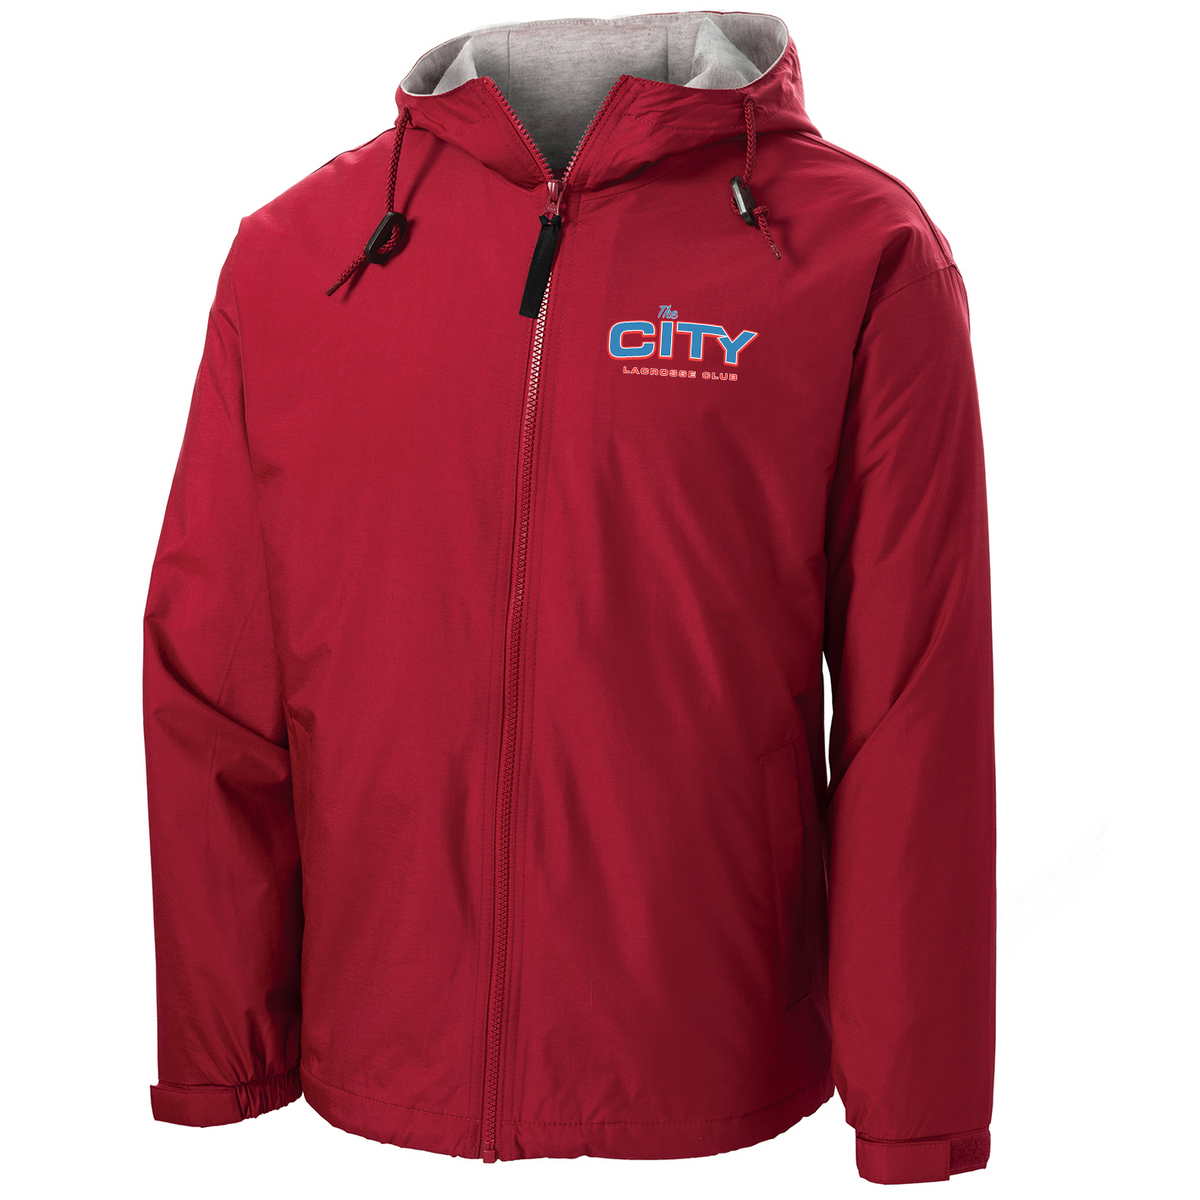 The City Lacrosse Club Hooded Jacket